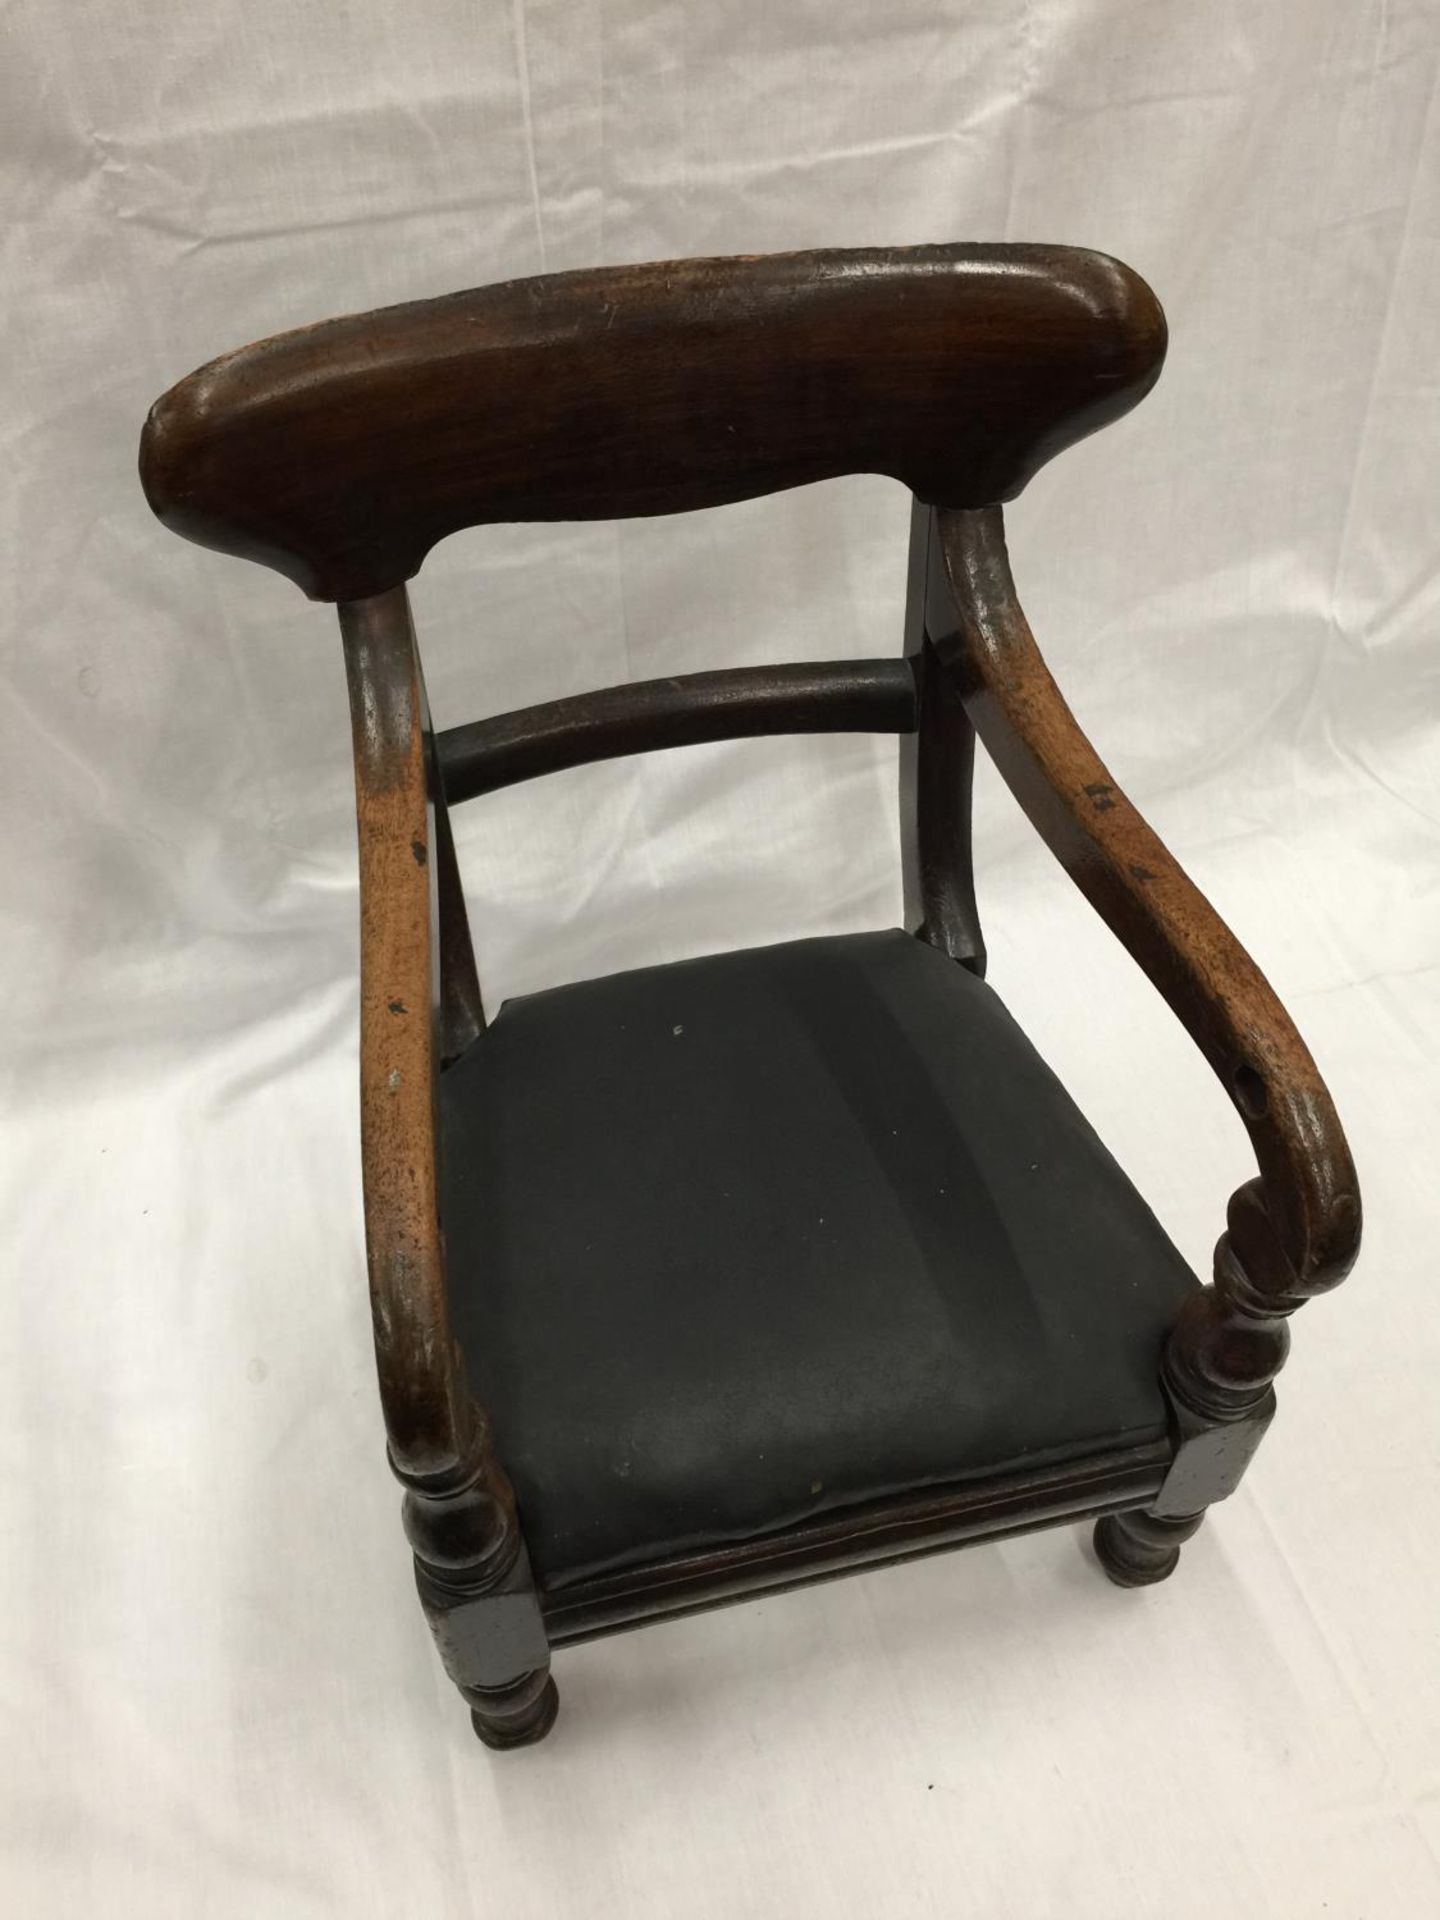 AN 1860'S VICTORIAN CHILD'S OAK CHAIR WITH TURNED LEGS AND A PADDED SEAT - Image 5 of 5